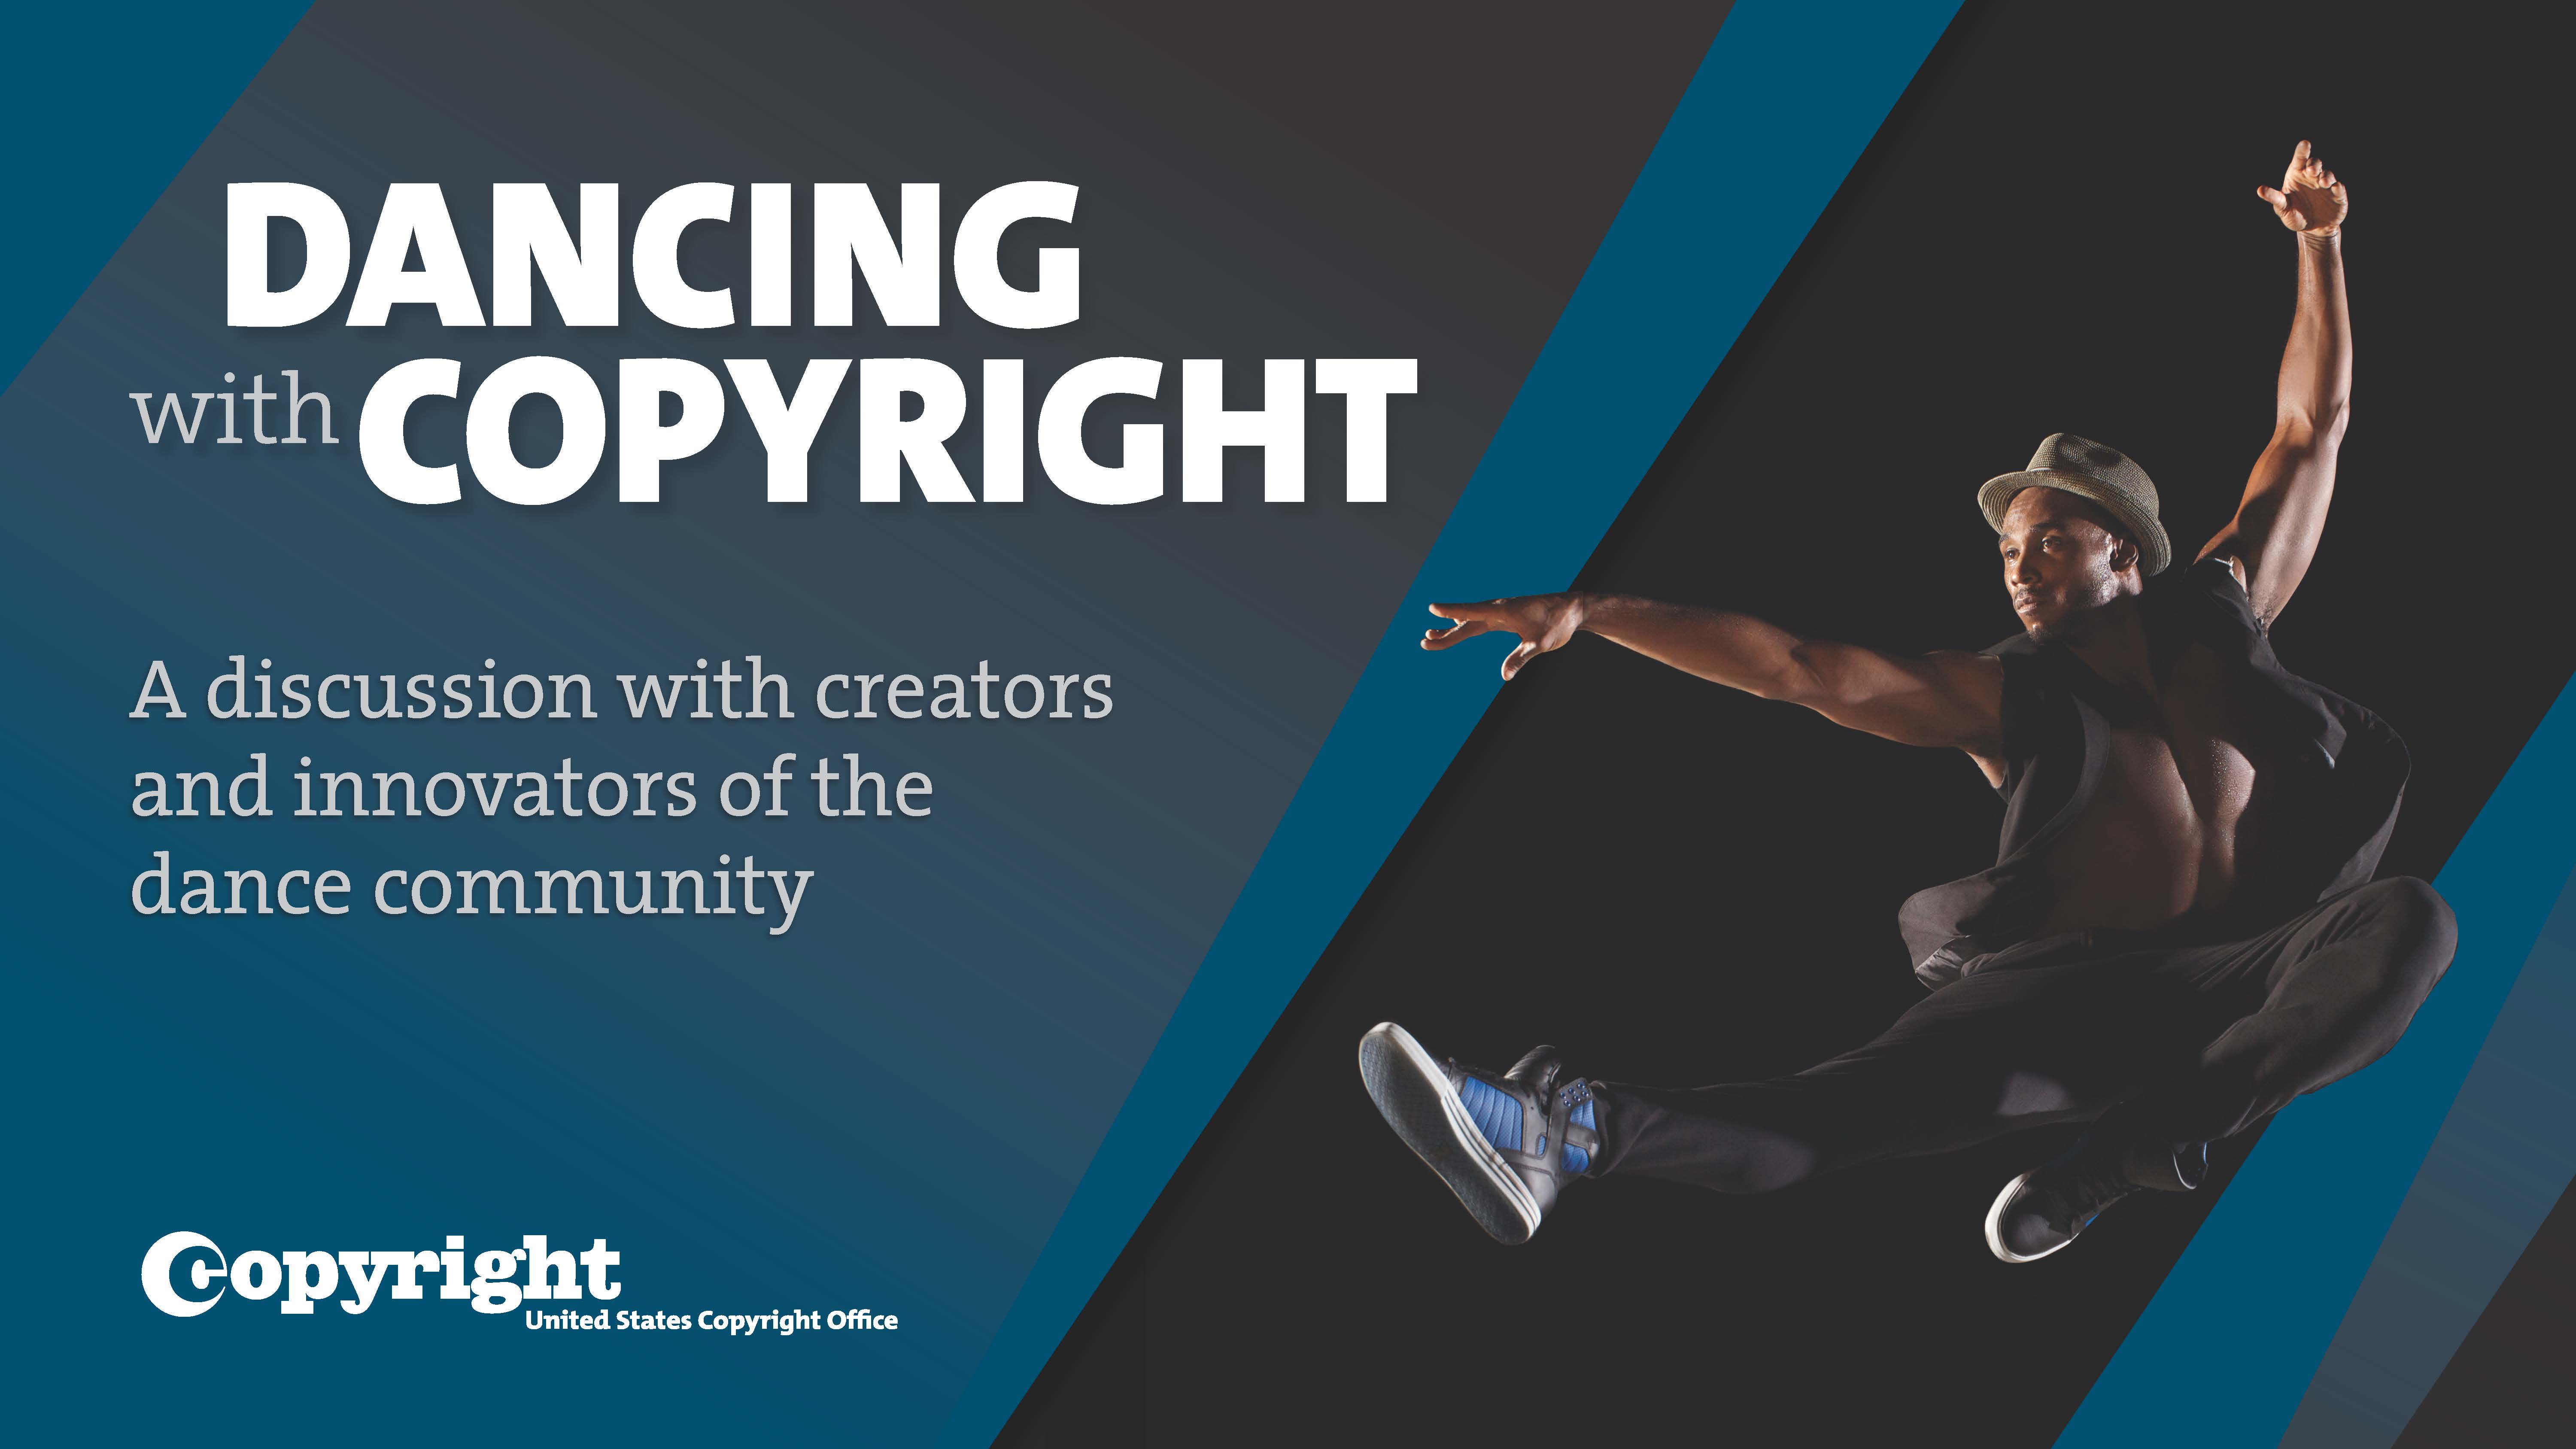 Dancing with Copyright Flyer